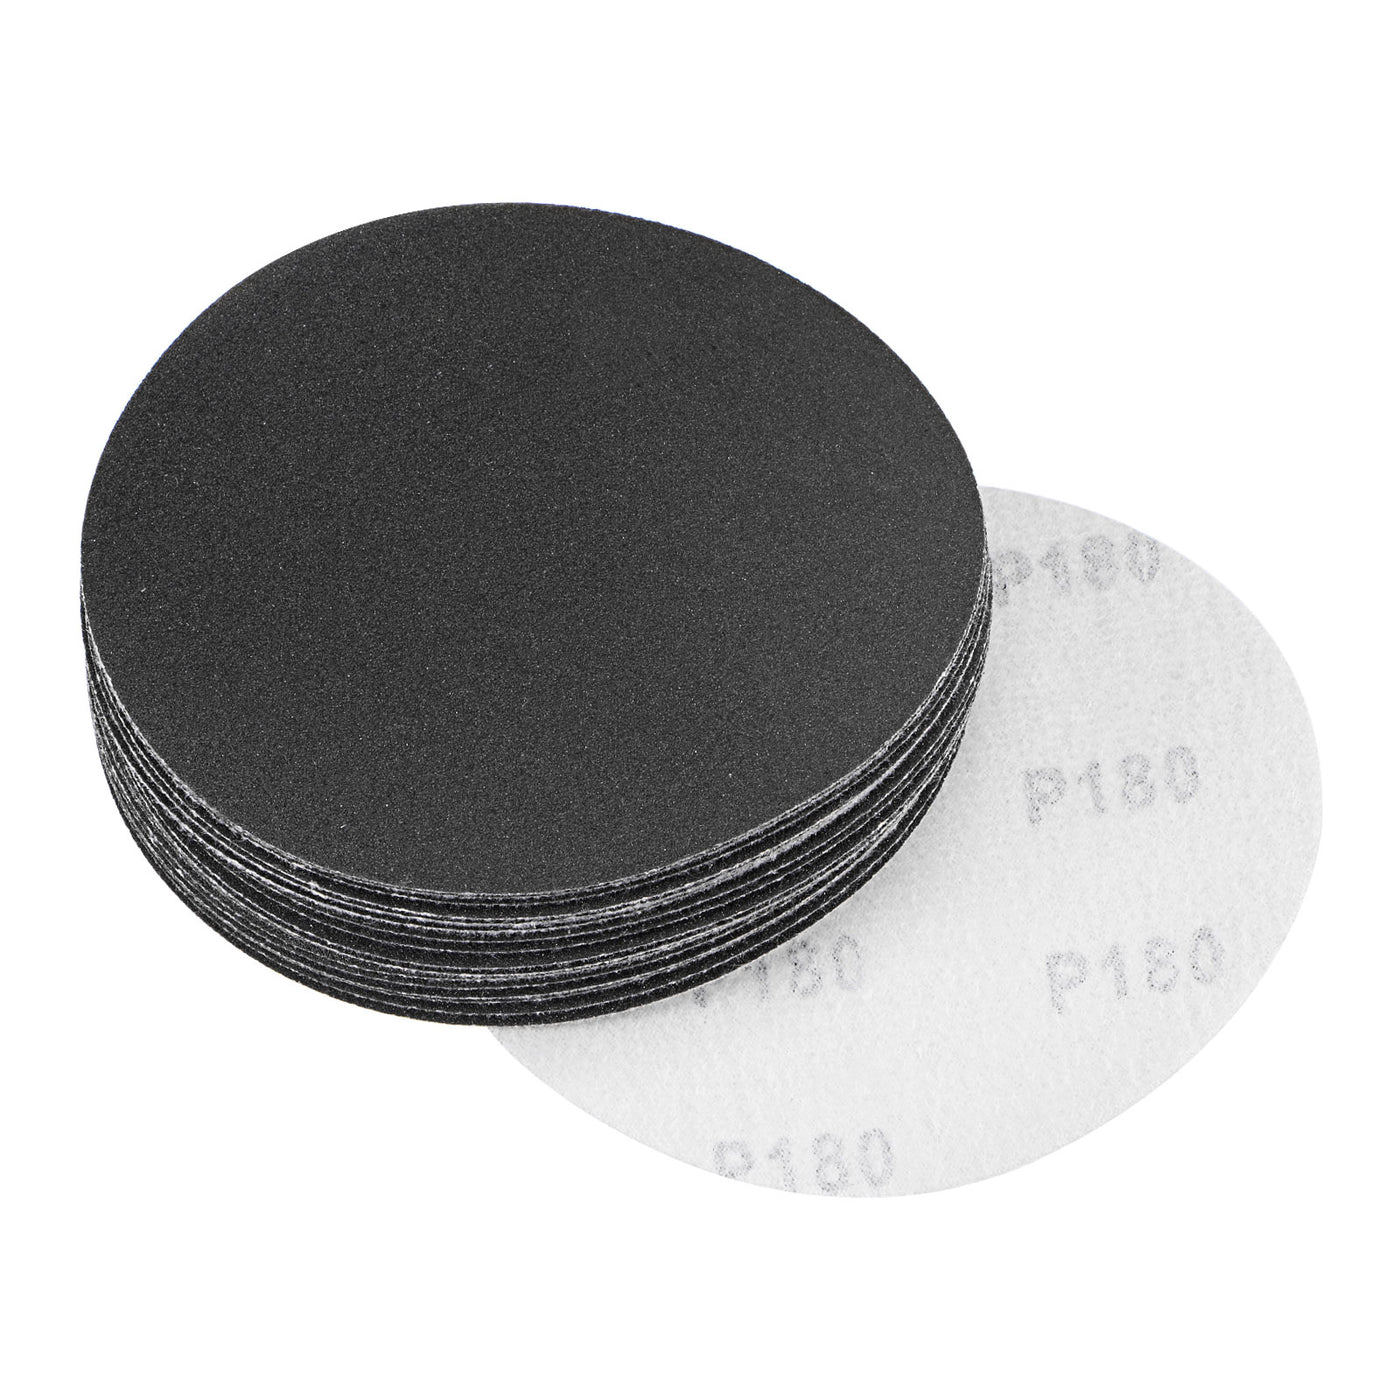 Uxcell Uxcell 5 Inch Sanding Disc 80Grit Hook and Loop Silicon Carbide C-Weight Backing 20Pcs